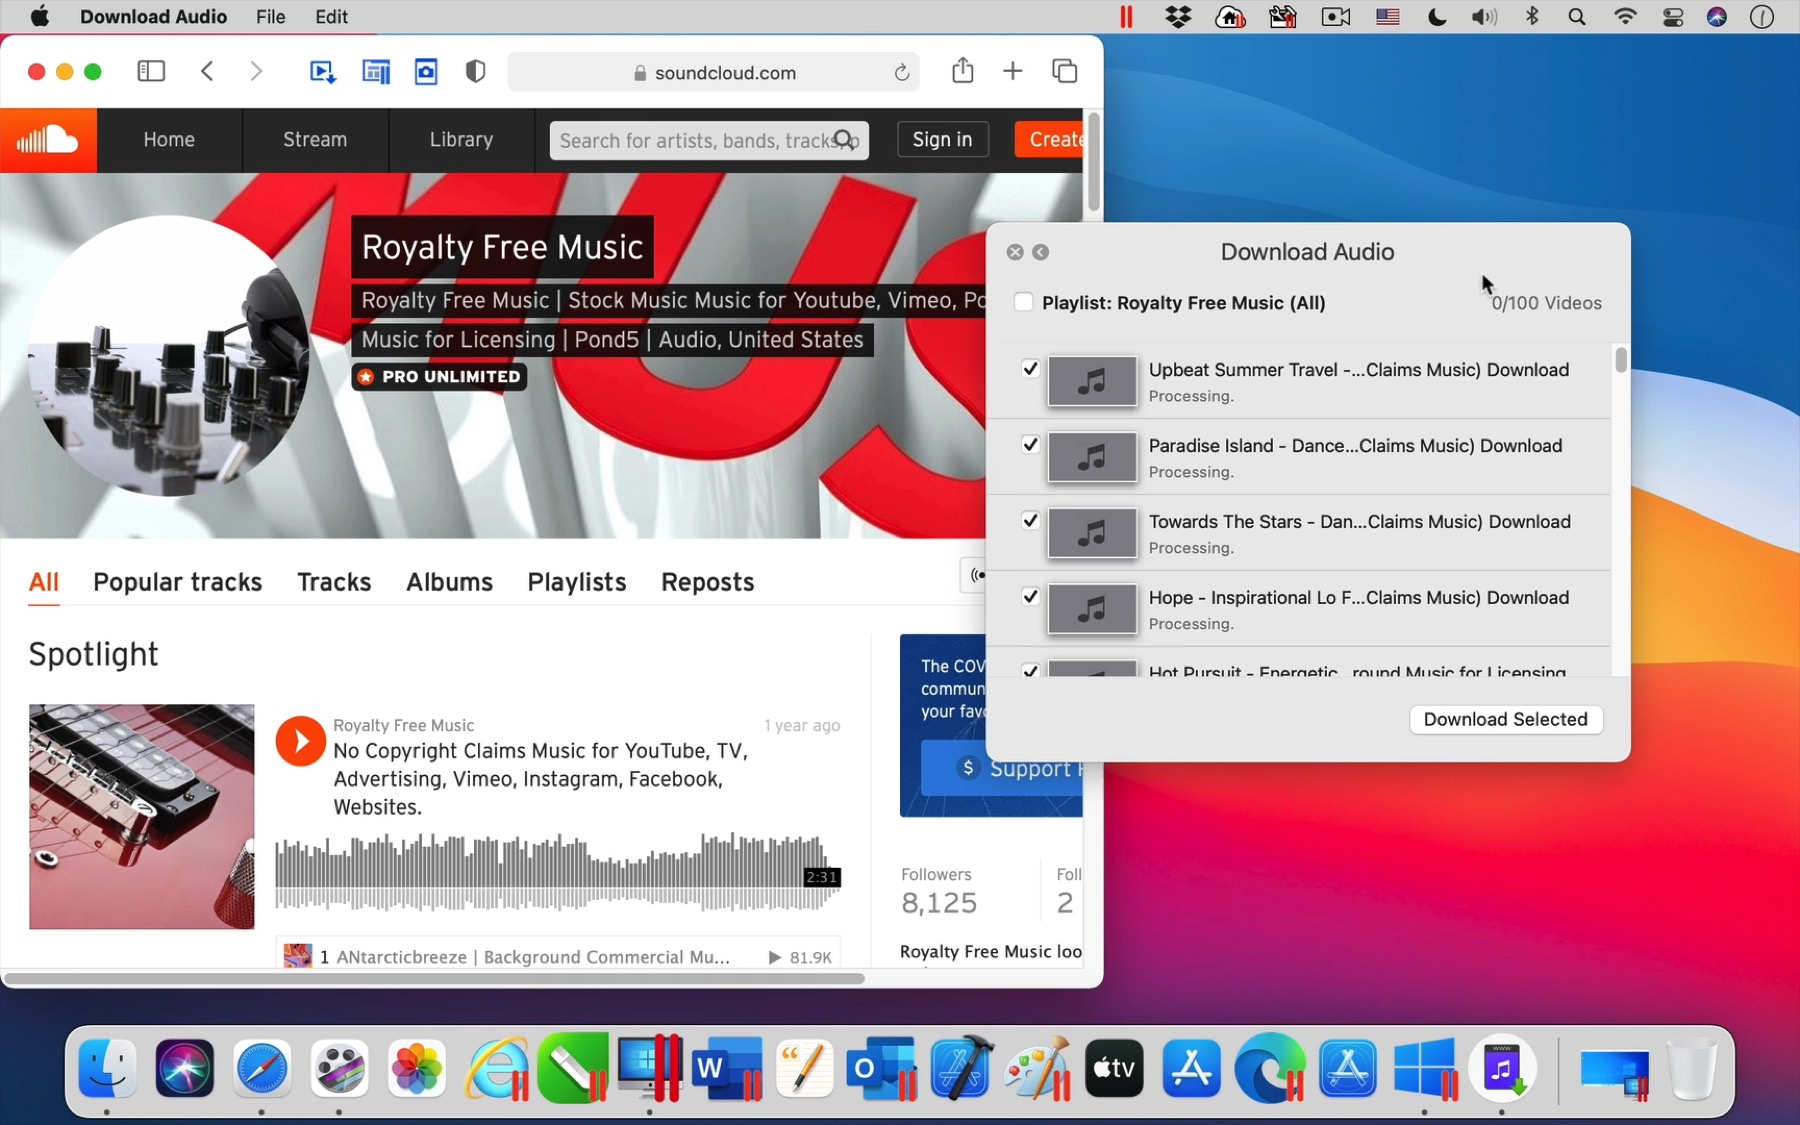 parallels toolbox for mac coupon code